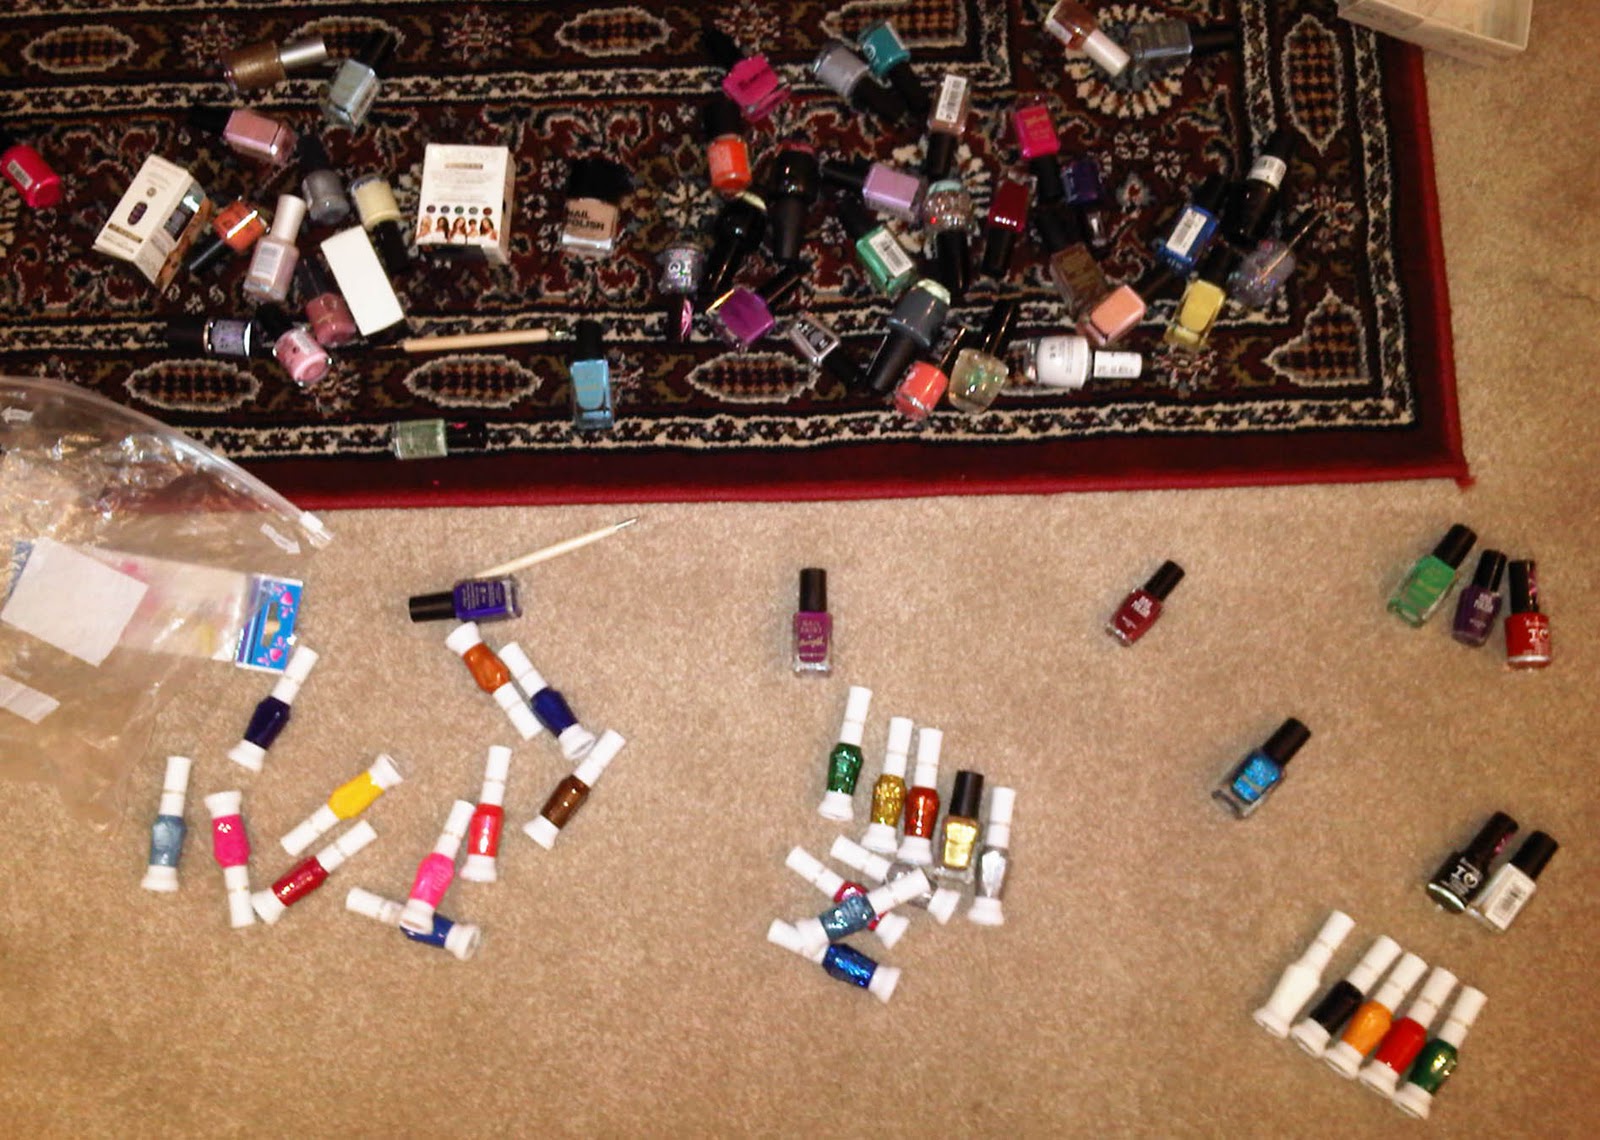 The 24 nail art pens, which I got from this seller on ebay,